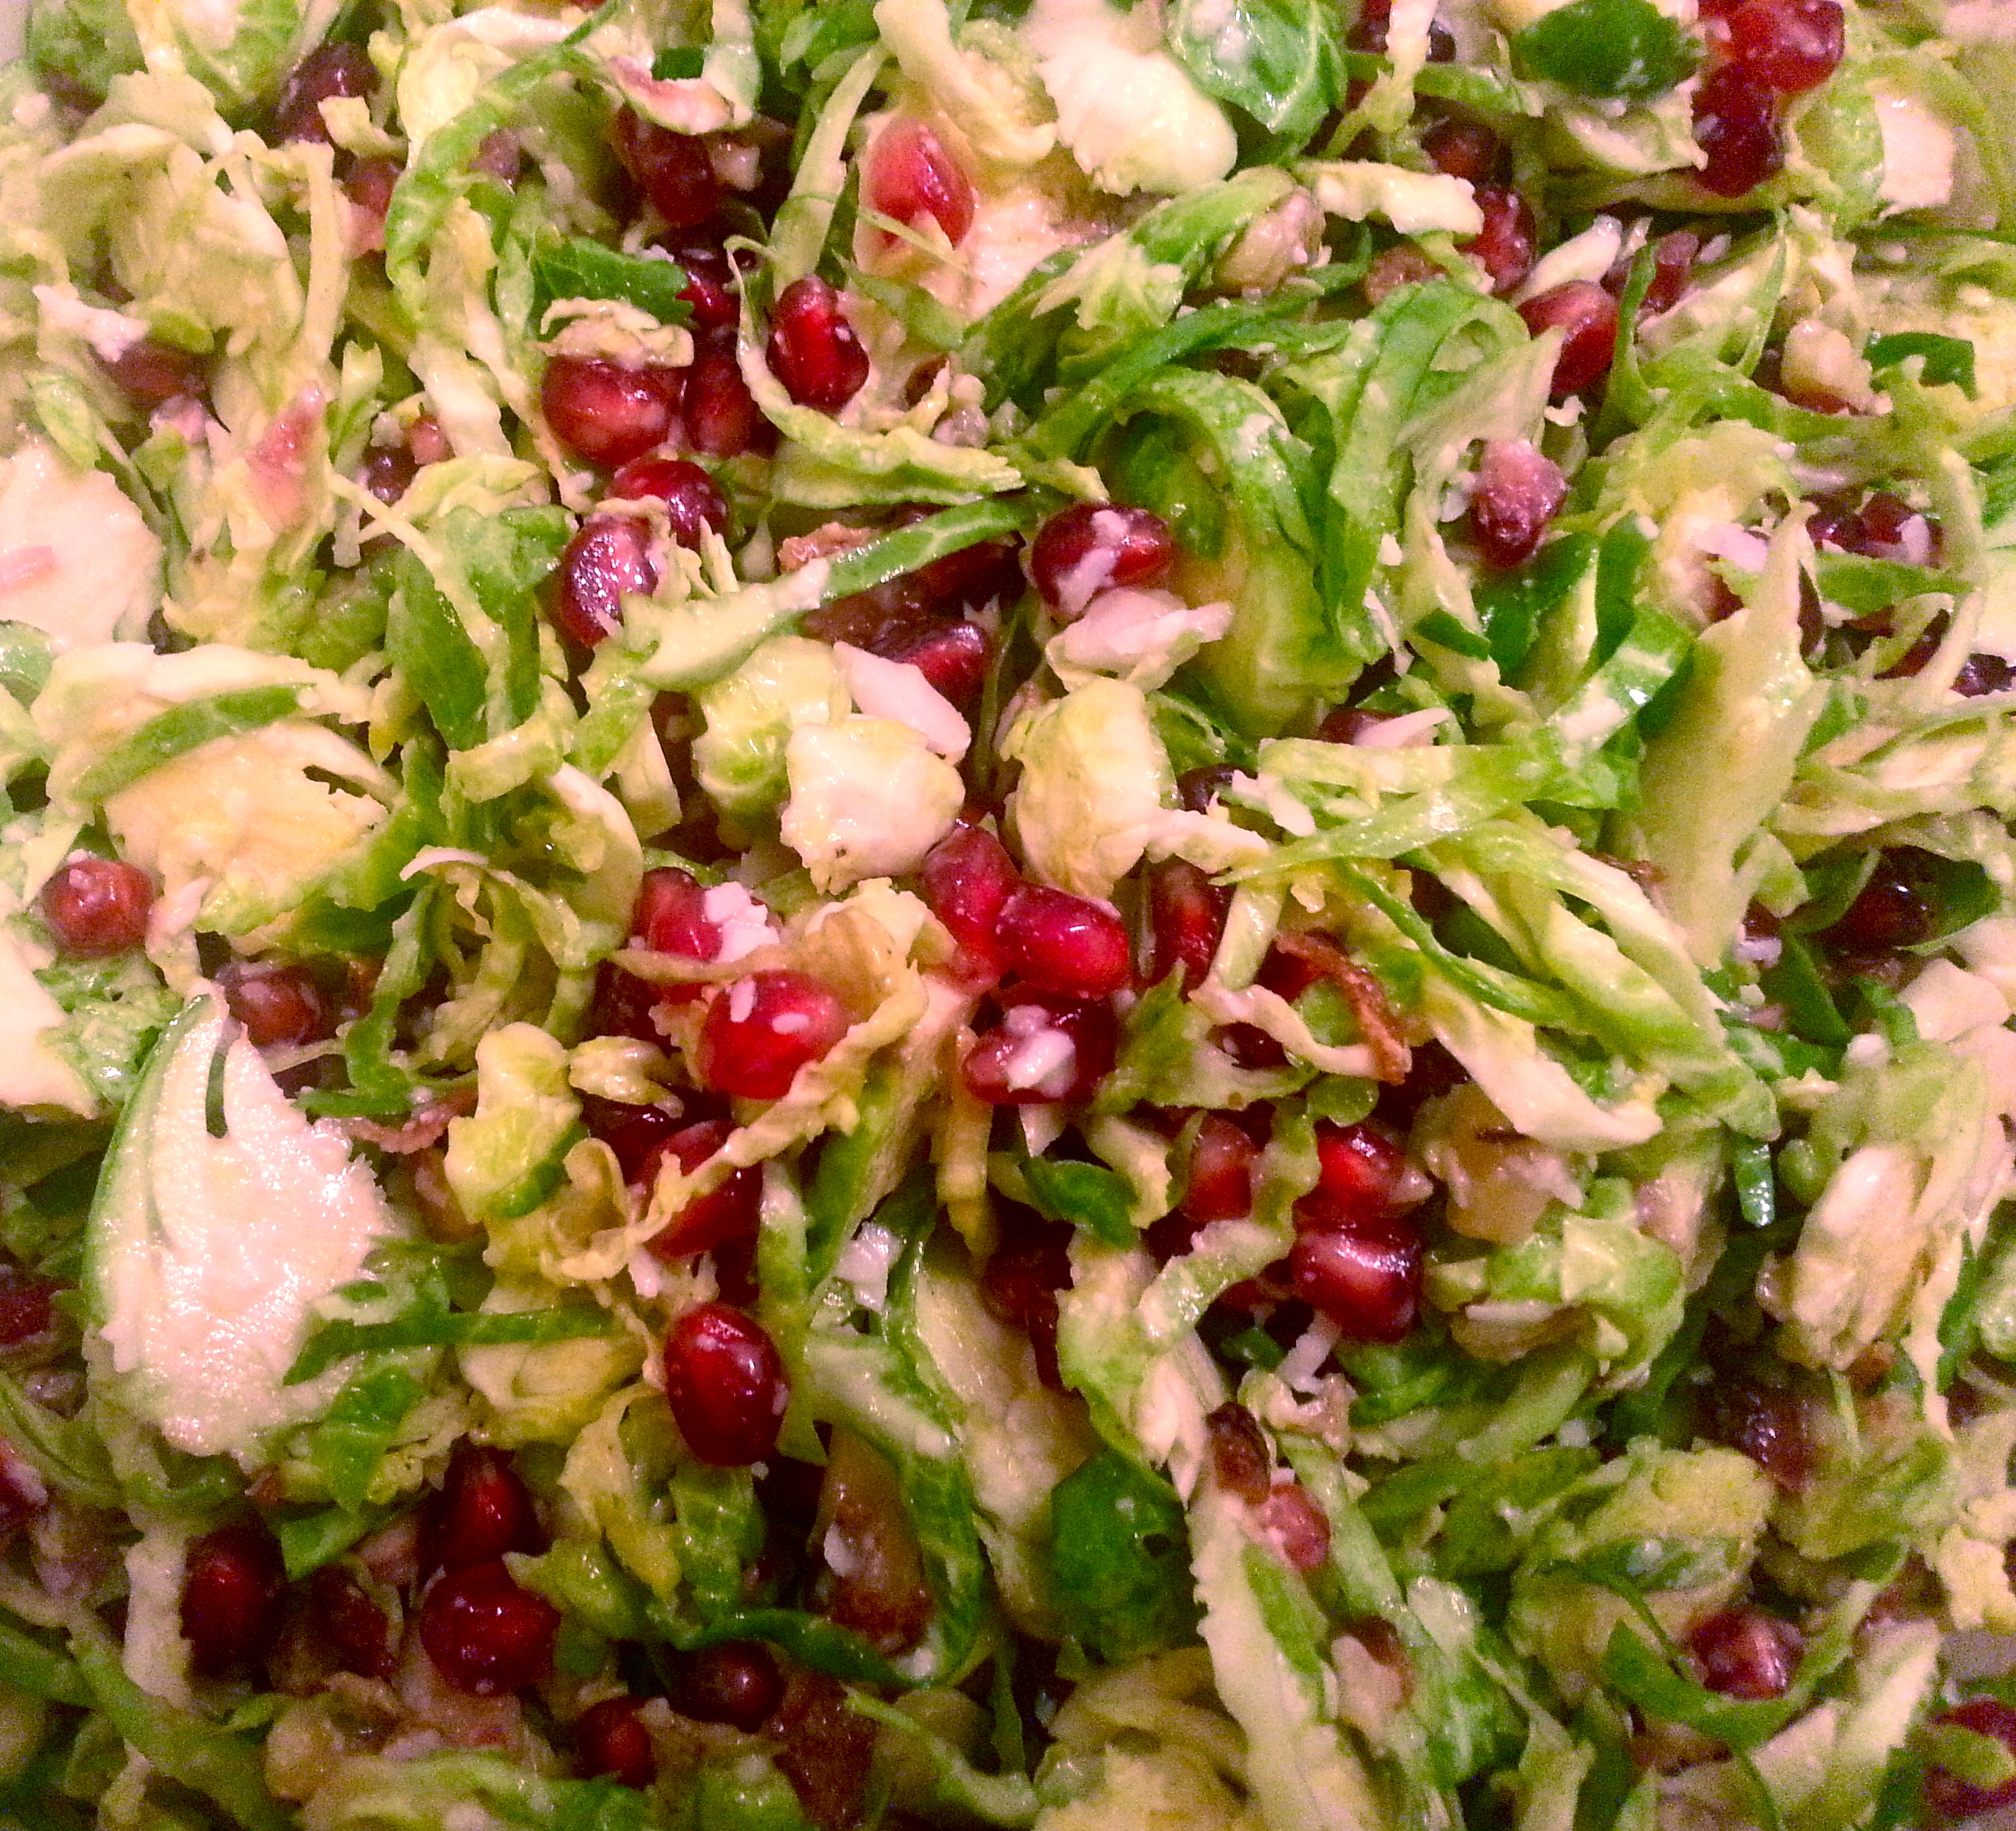 Pomegranate Brussel Sprout Salad | Simply Scrumptious by Sarah